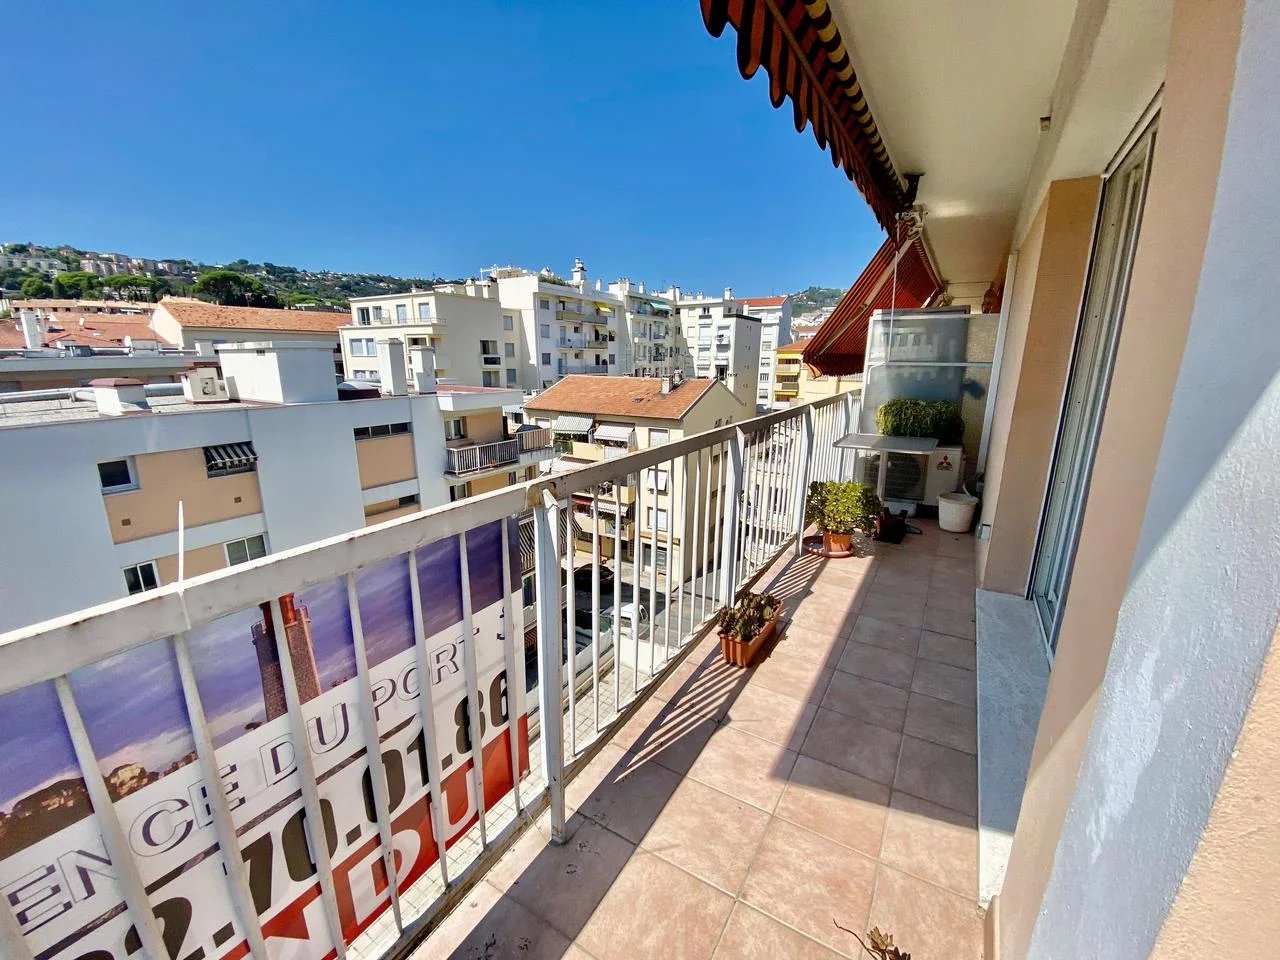 Appartement  3 Rooms 61.4m2  for sale   260 000 €